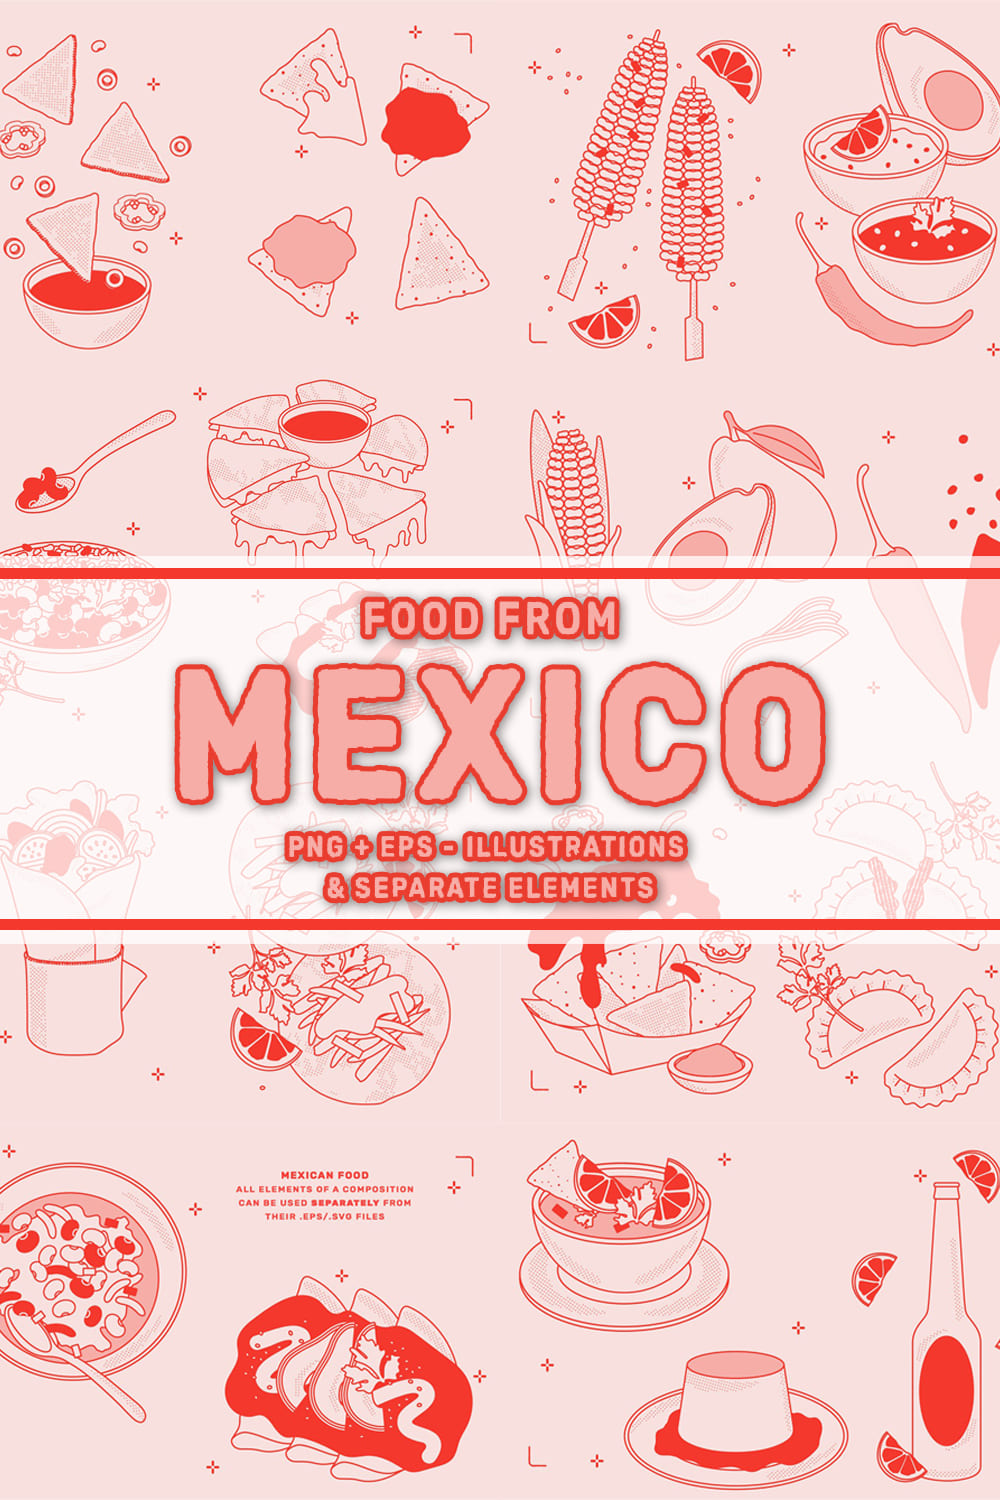 Mexican Food Vector Illustrations pinterest image.